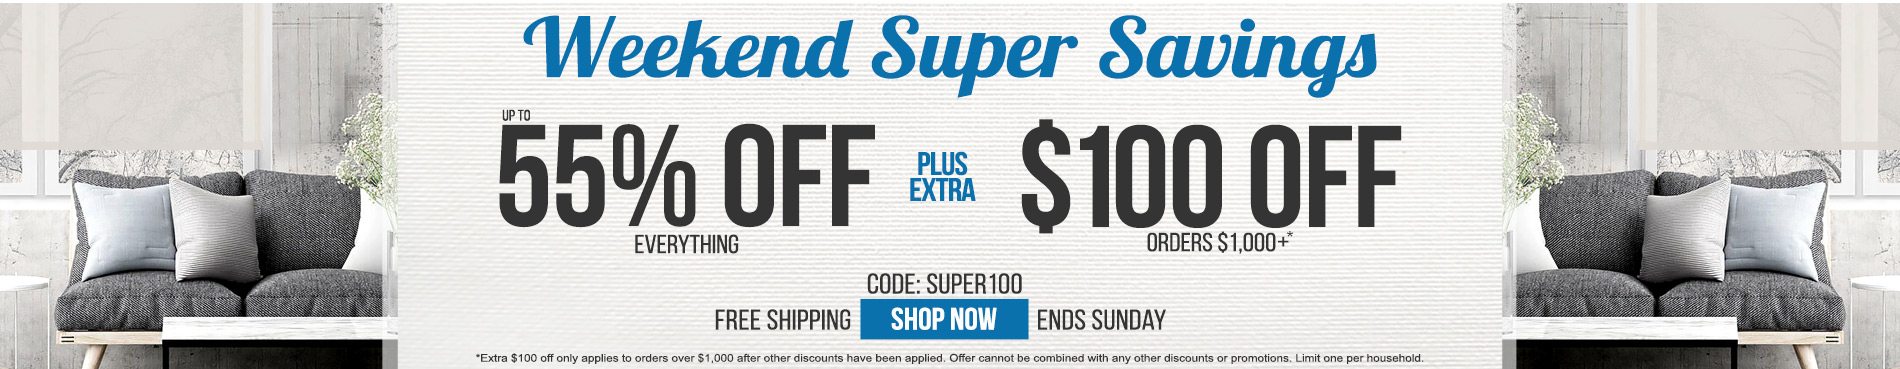 Up to 55% off everything plus extra $100 off orders $1,000+